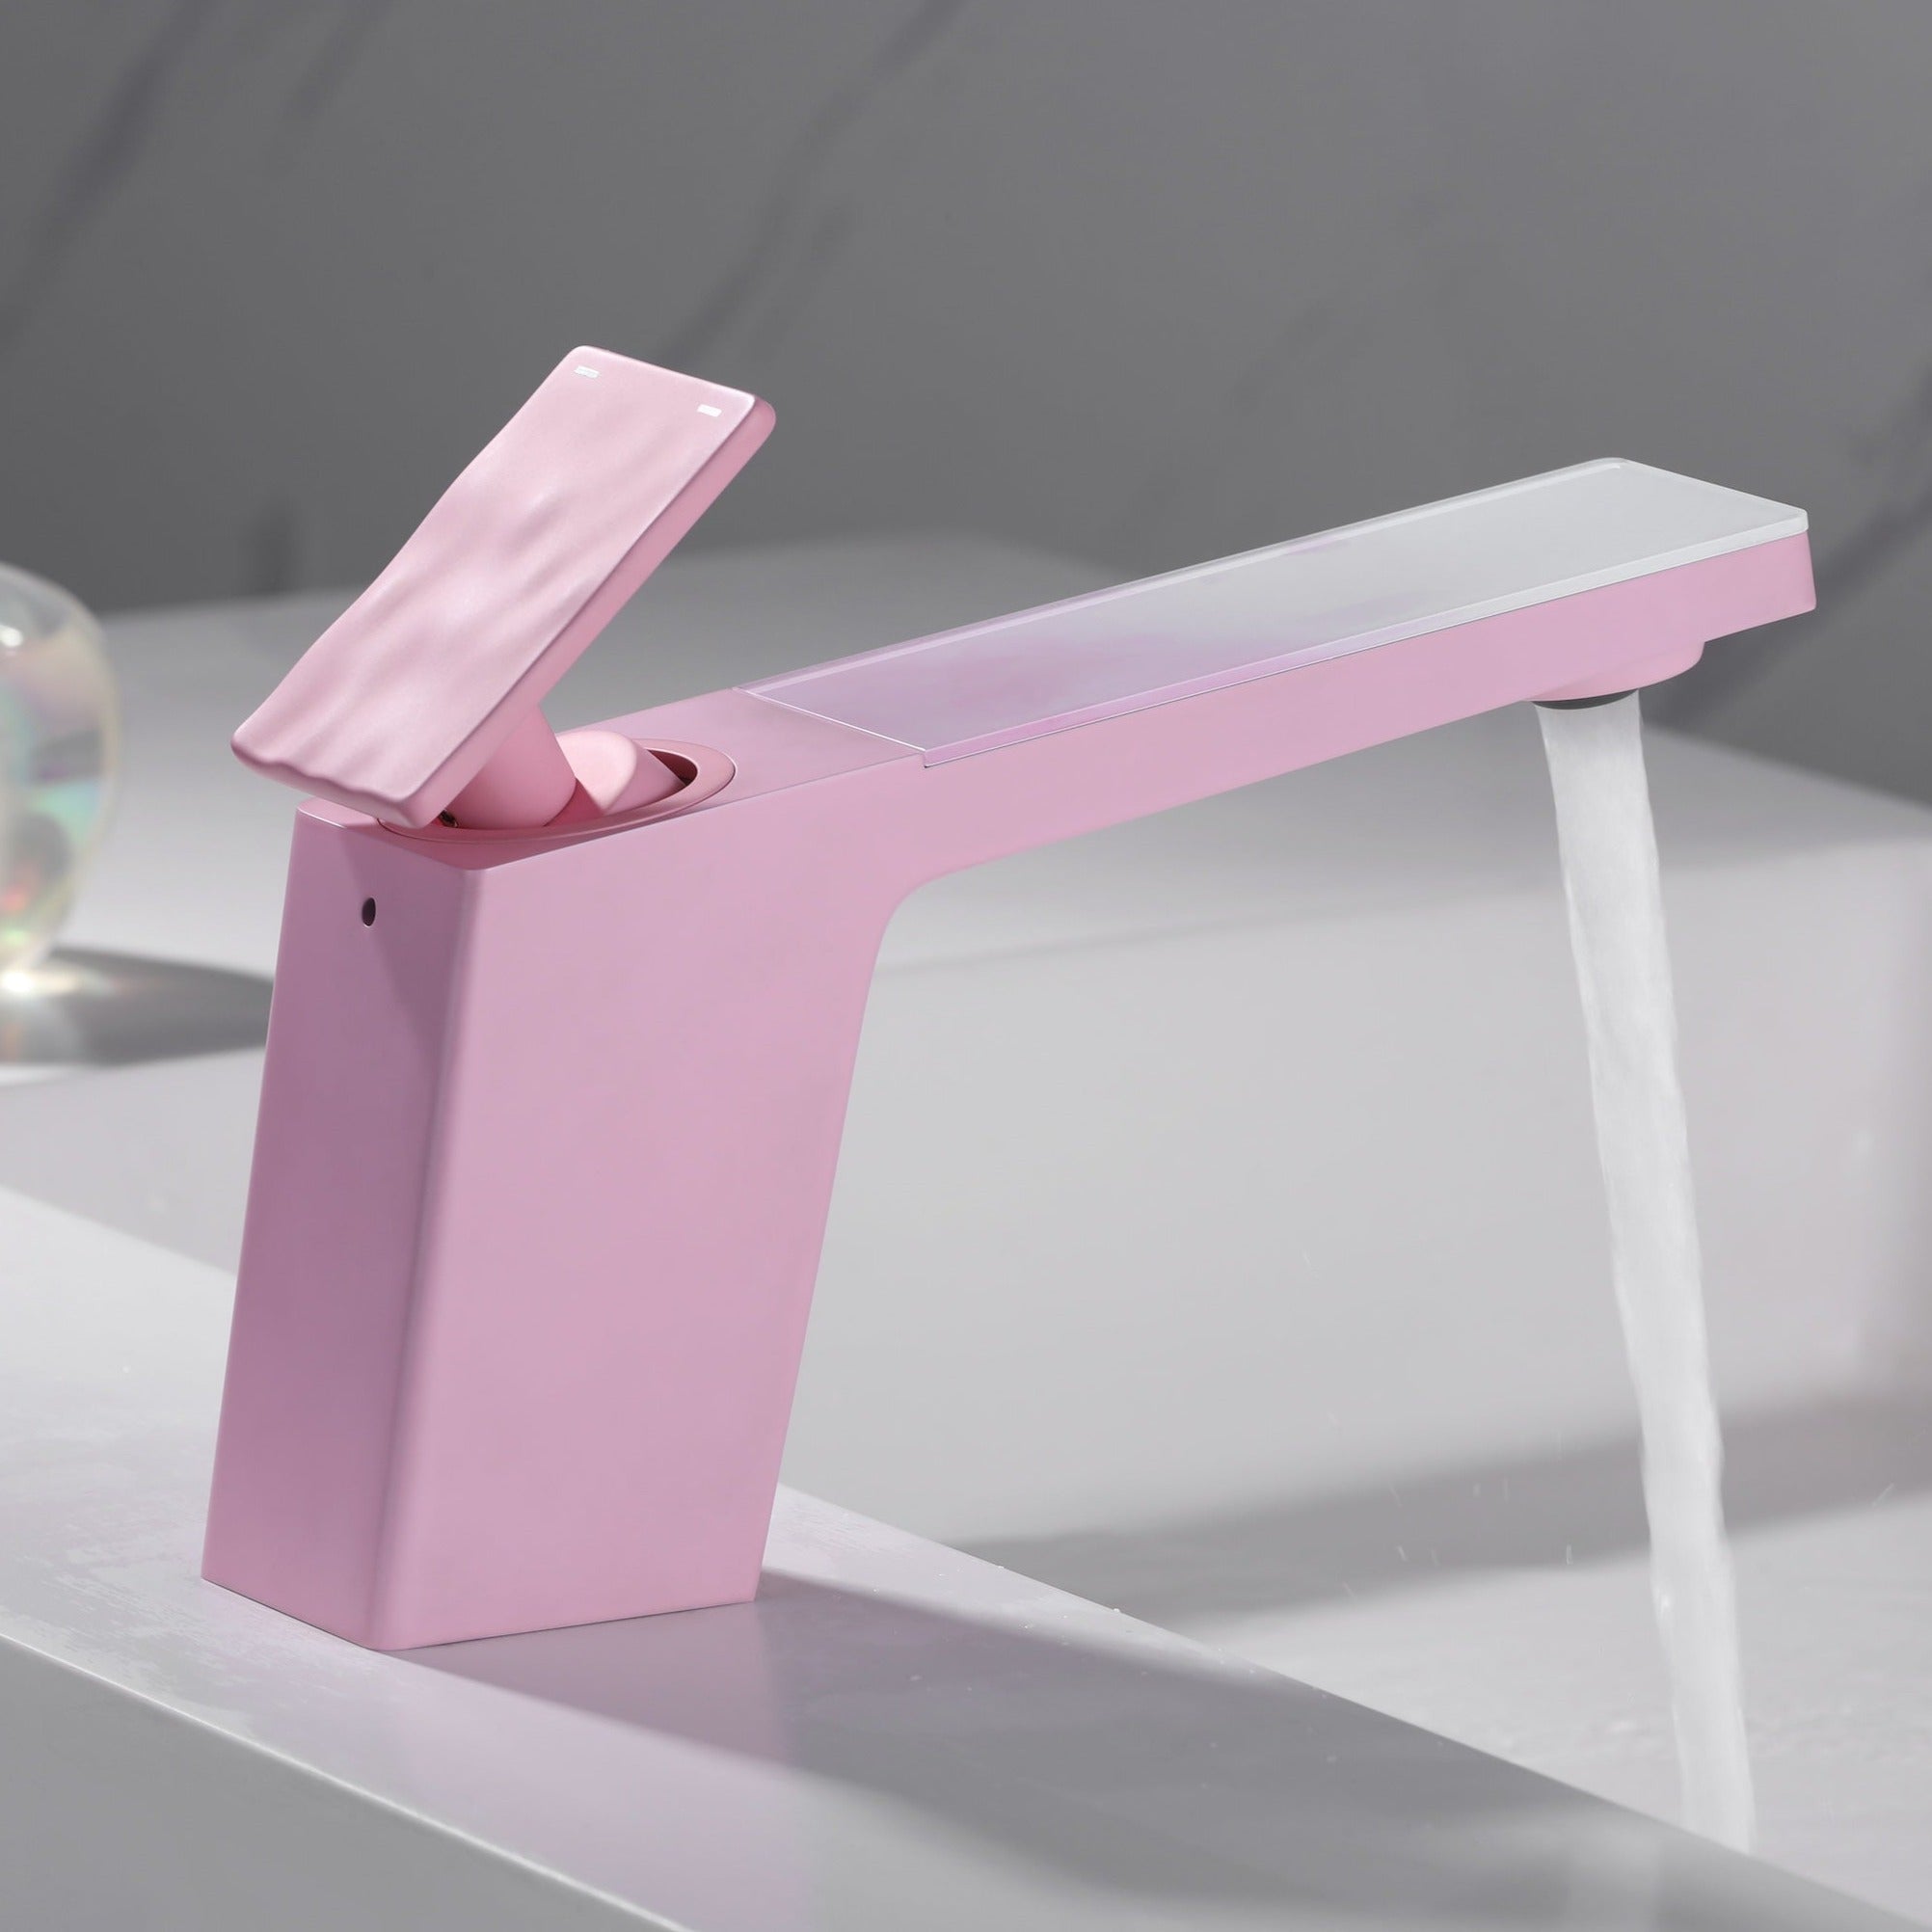 Rainly faucet fairy tale series pink finish back view with water #color_cherry blossom pink